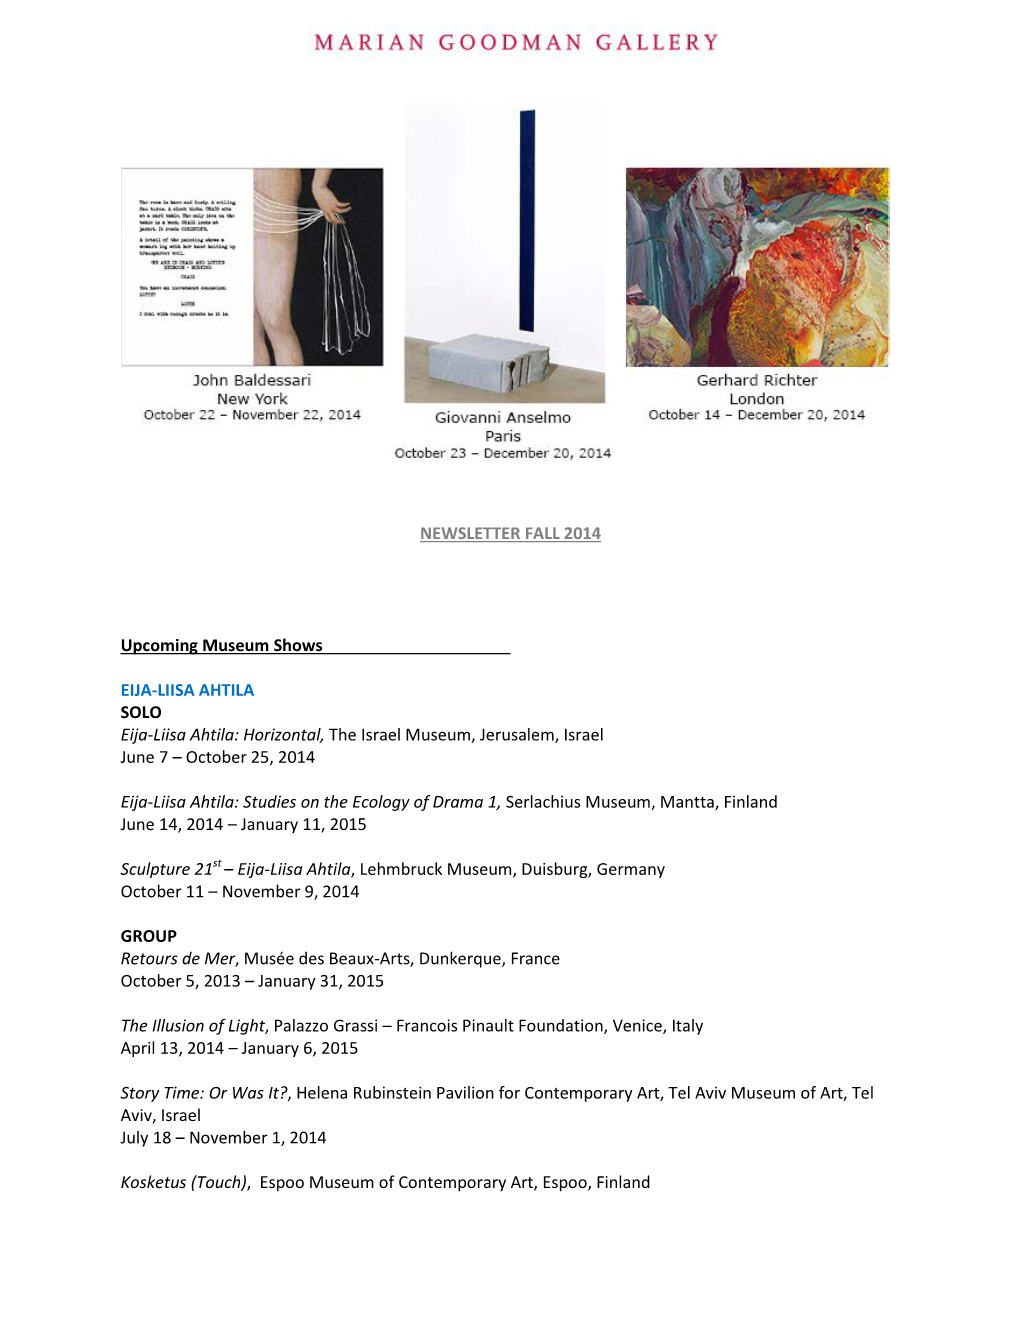 NEWSLETTER FALL 2014 Upcoming Museum Shows EIJA